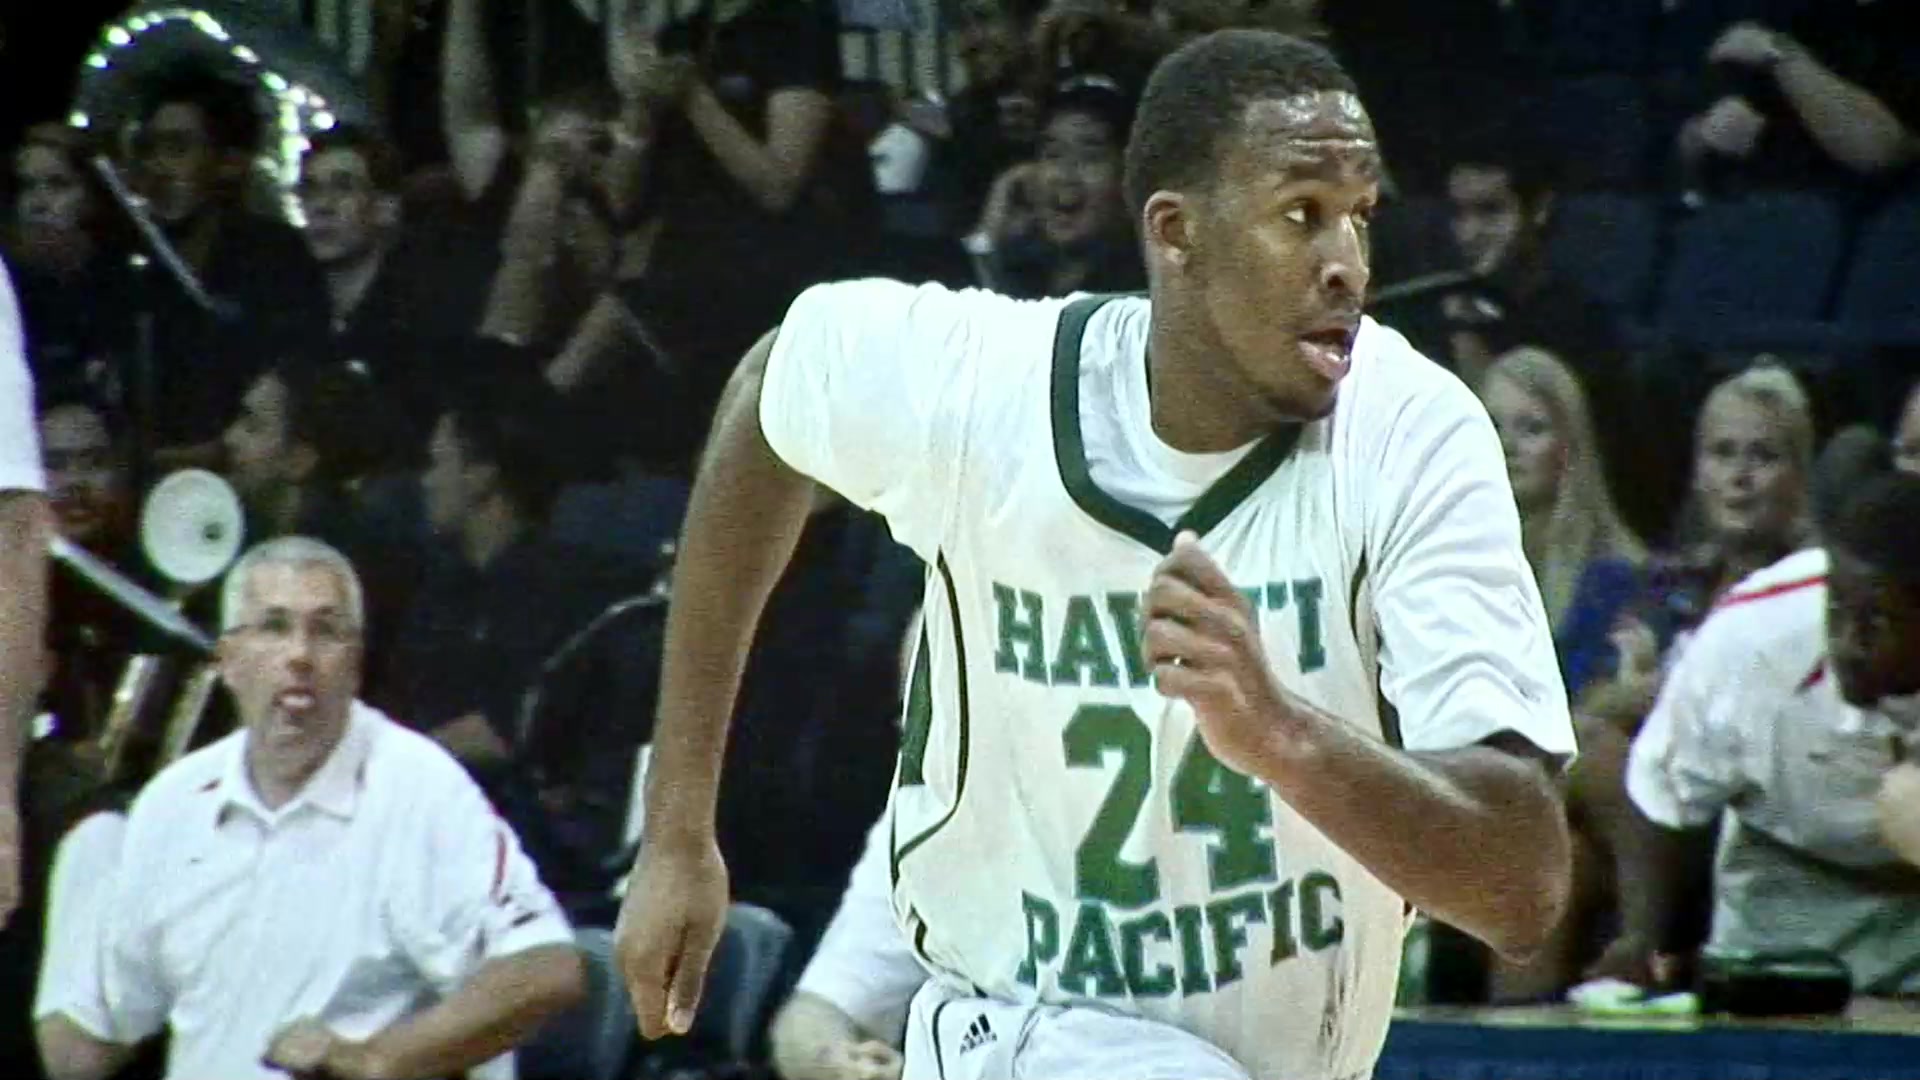 Kyle Allen running while playing in a basketball game for Hawai’i Pacific University.